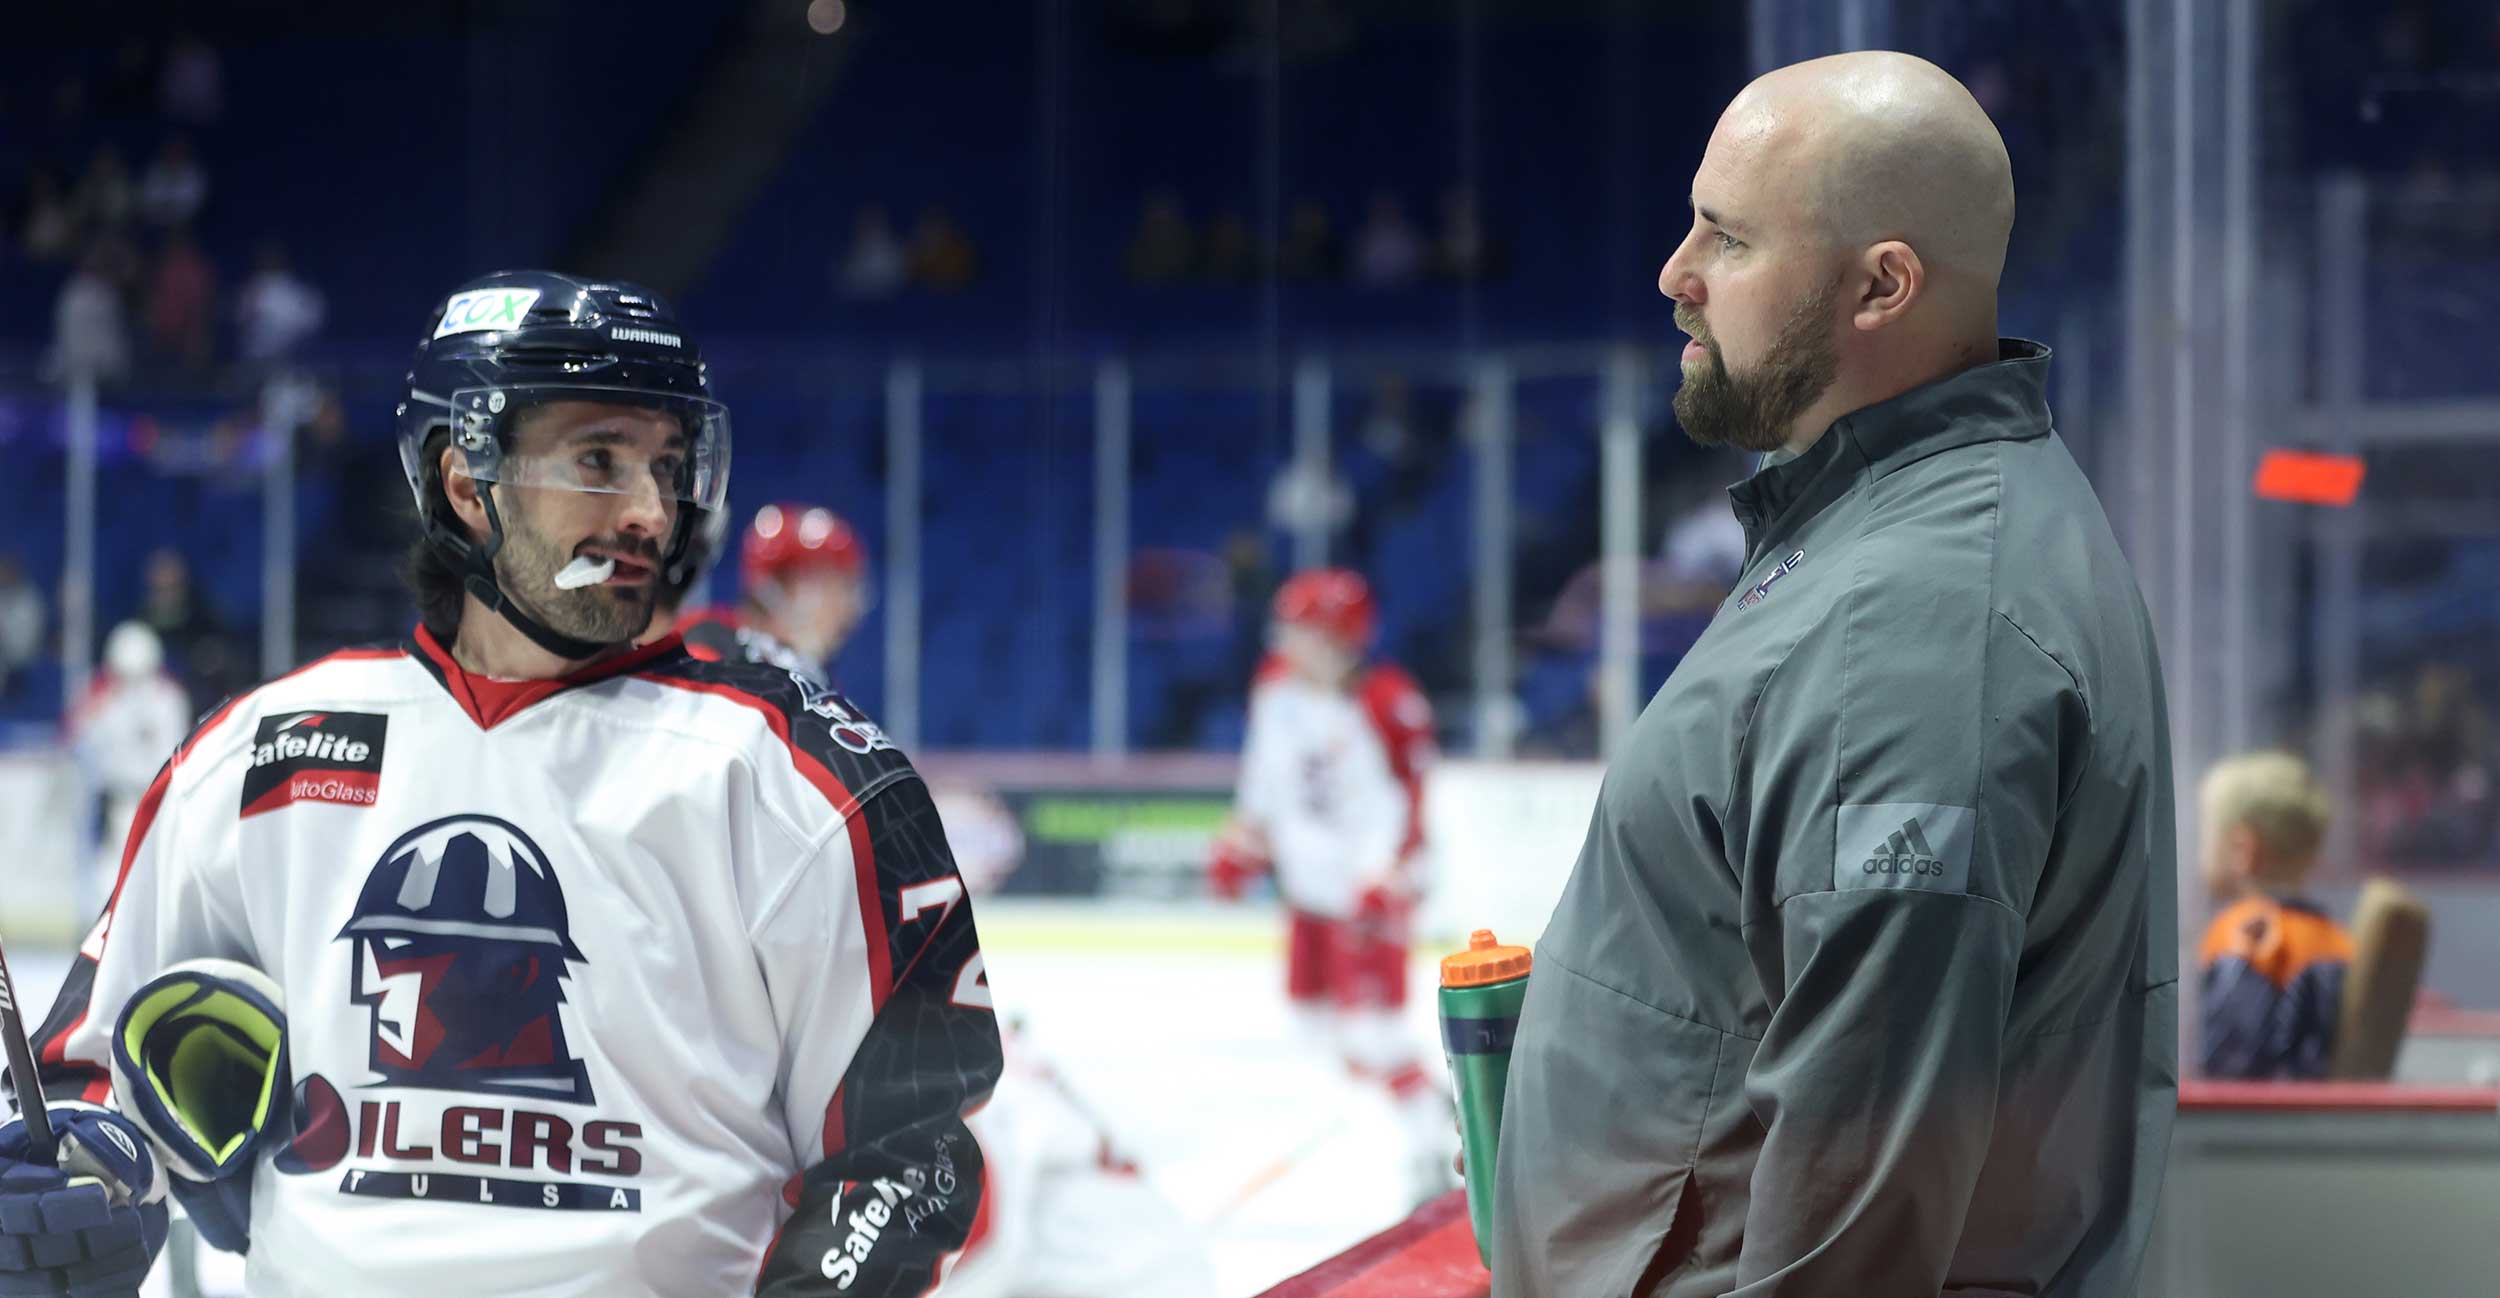 Steve Lintern, director of health and performance for the Tulsa Oilers and clinical athletic trainer at OSU-CHS' Athletic Training program, talks with Tulsa Oilers hockey player Darren McCormick before a game in Tulsa on March 11, 2022.